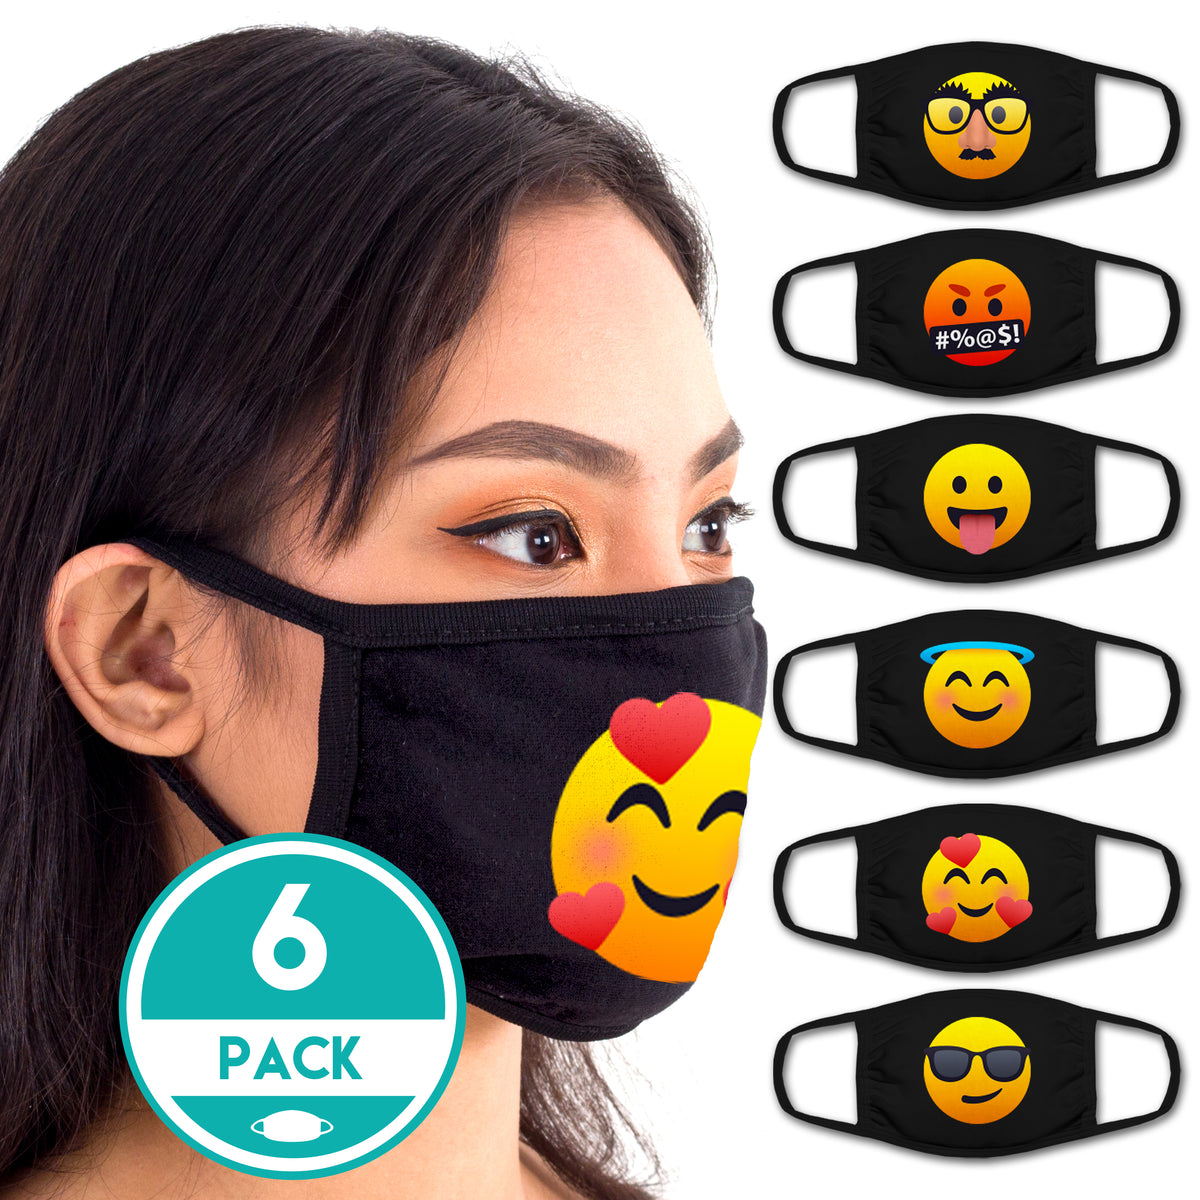 Face Mouth Mask - Cotton Face Covering Neck Mask for Men and Women - 6 Pack Emoticon